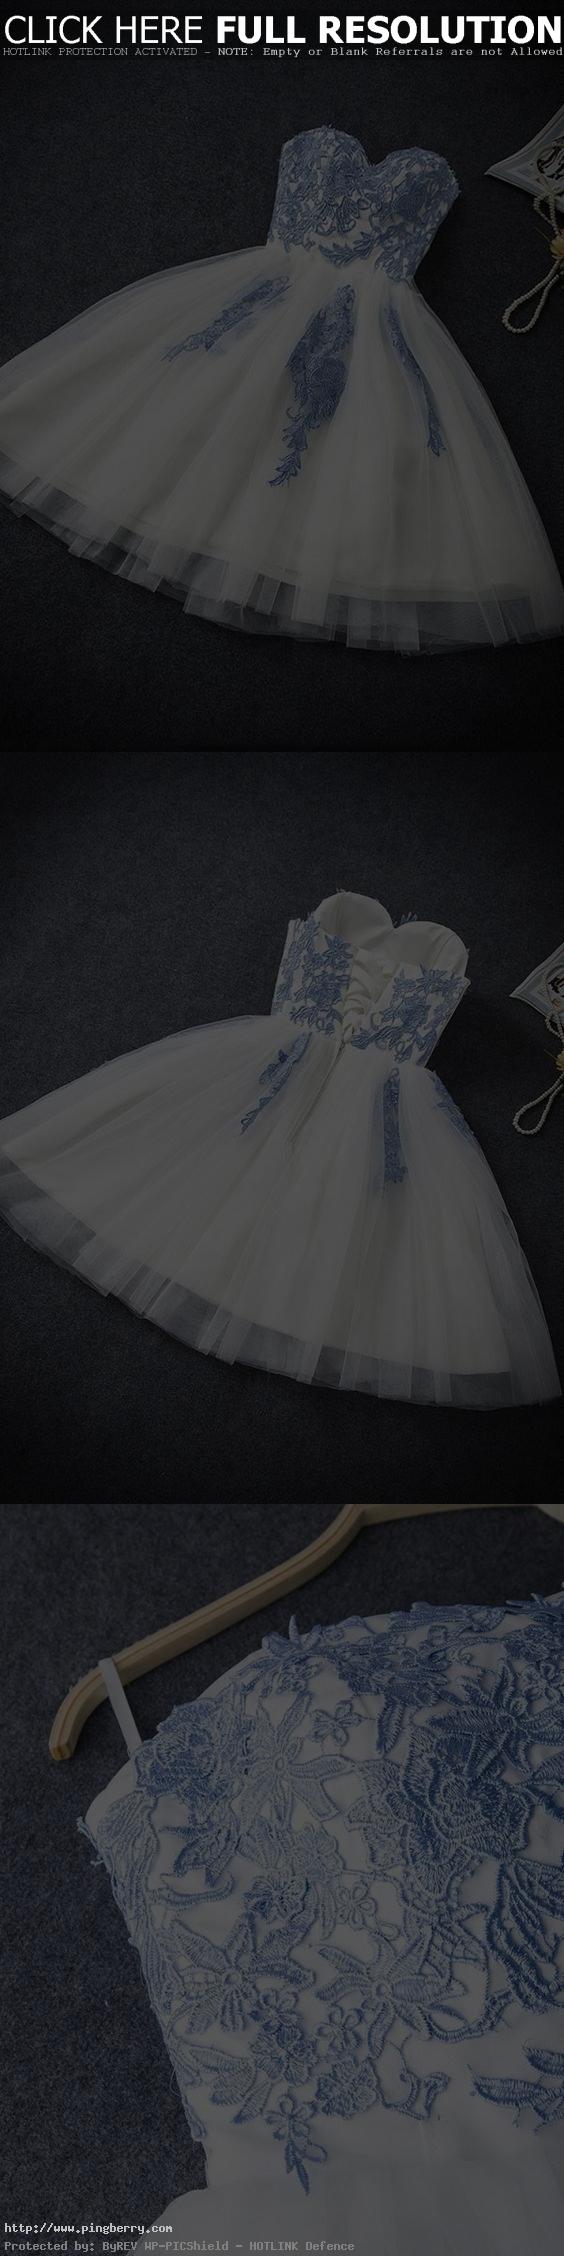 Charming Prom Dress,Cute Prom Gown,Tulle Party Dress,Elegant Homecoming...